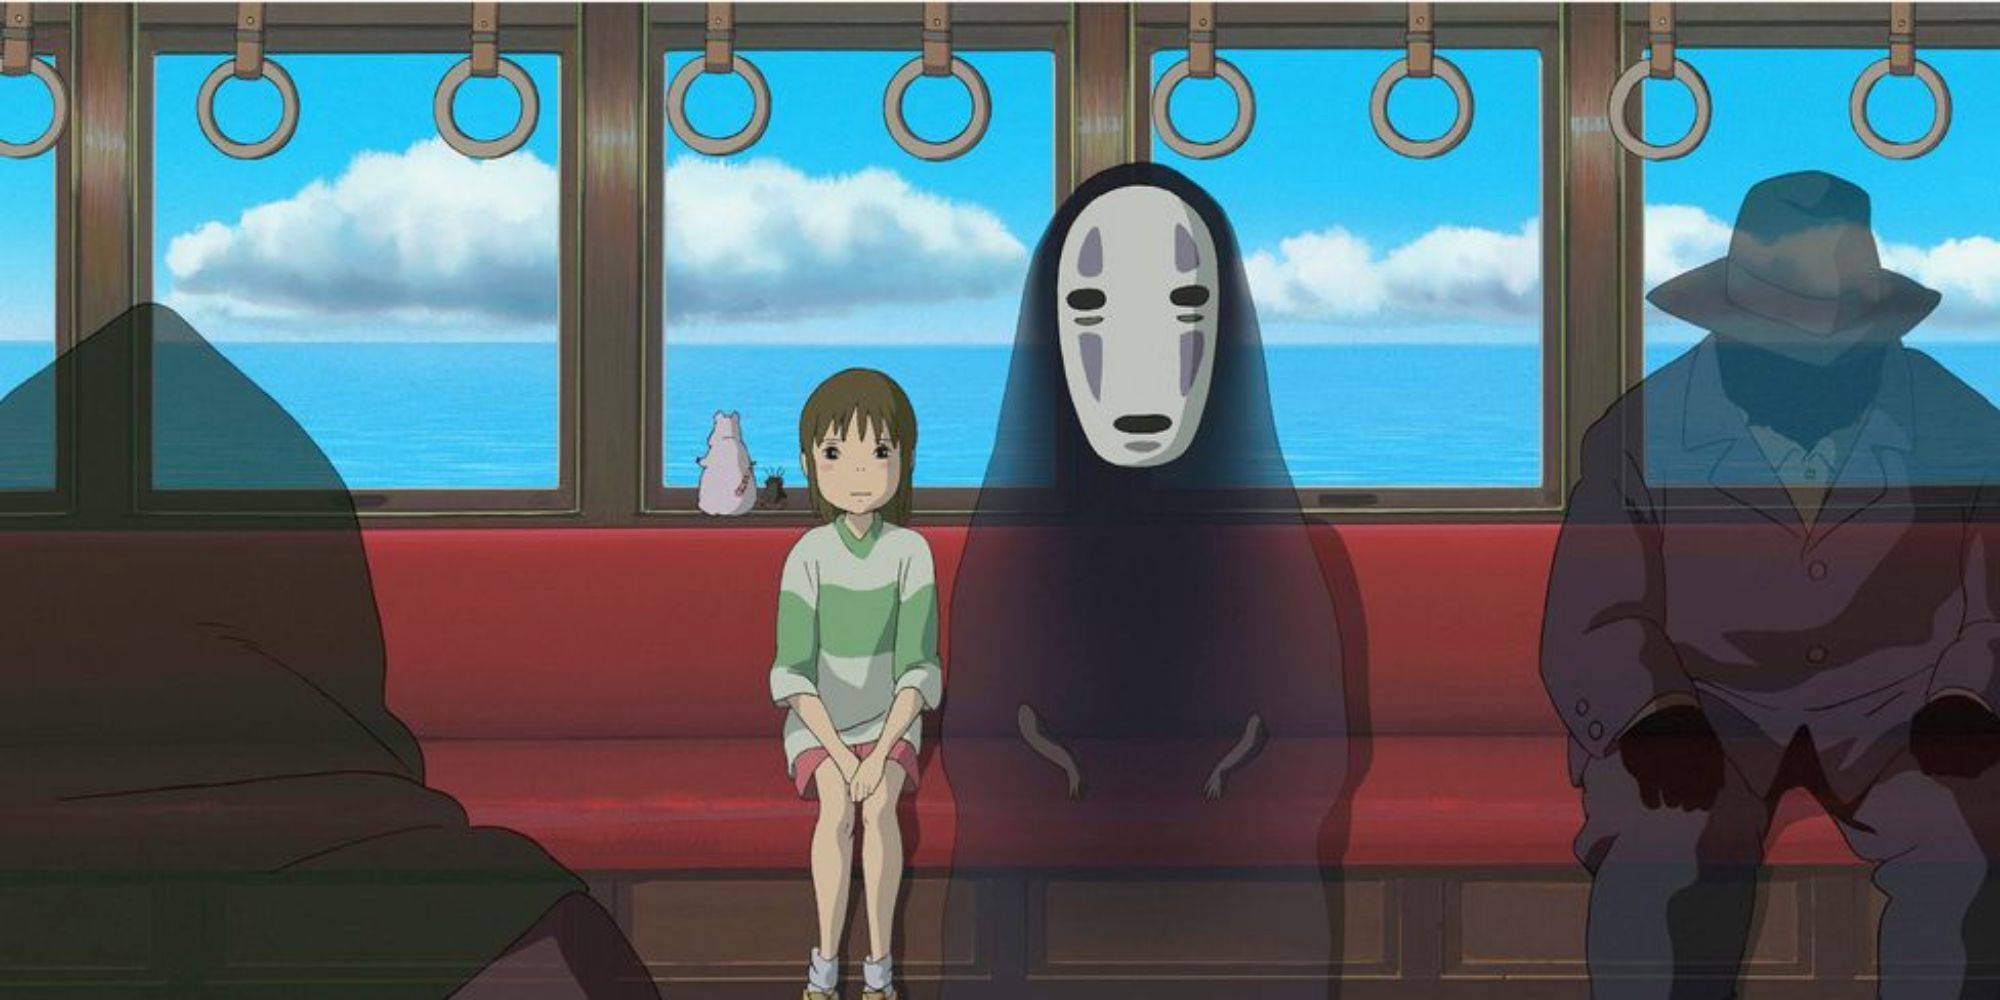 Chihiro and No-Face wait on the train in 'Spirited Away'